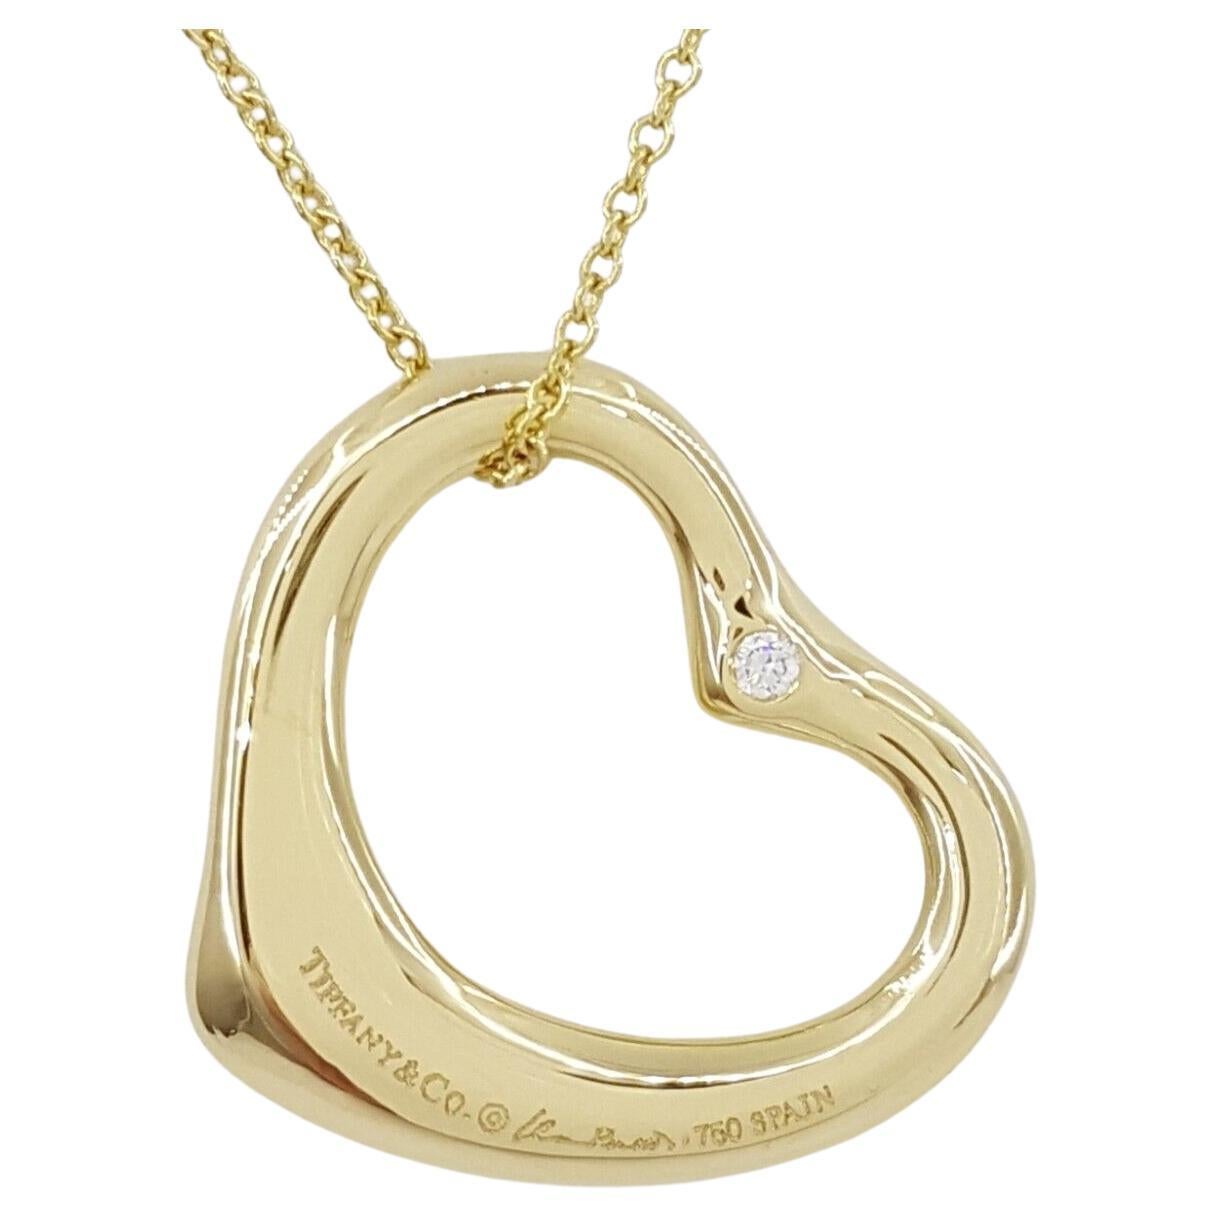  Tiffany & Co. Open Heart Pendant Diamond Necklace almost 8 grams of 18k gold